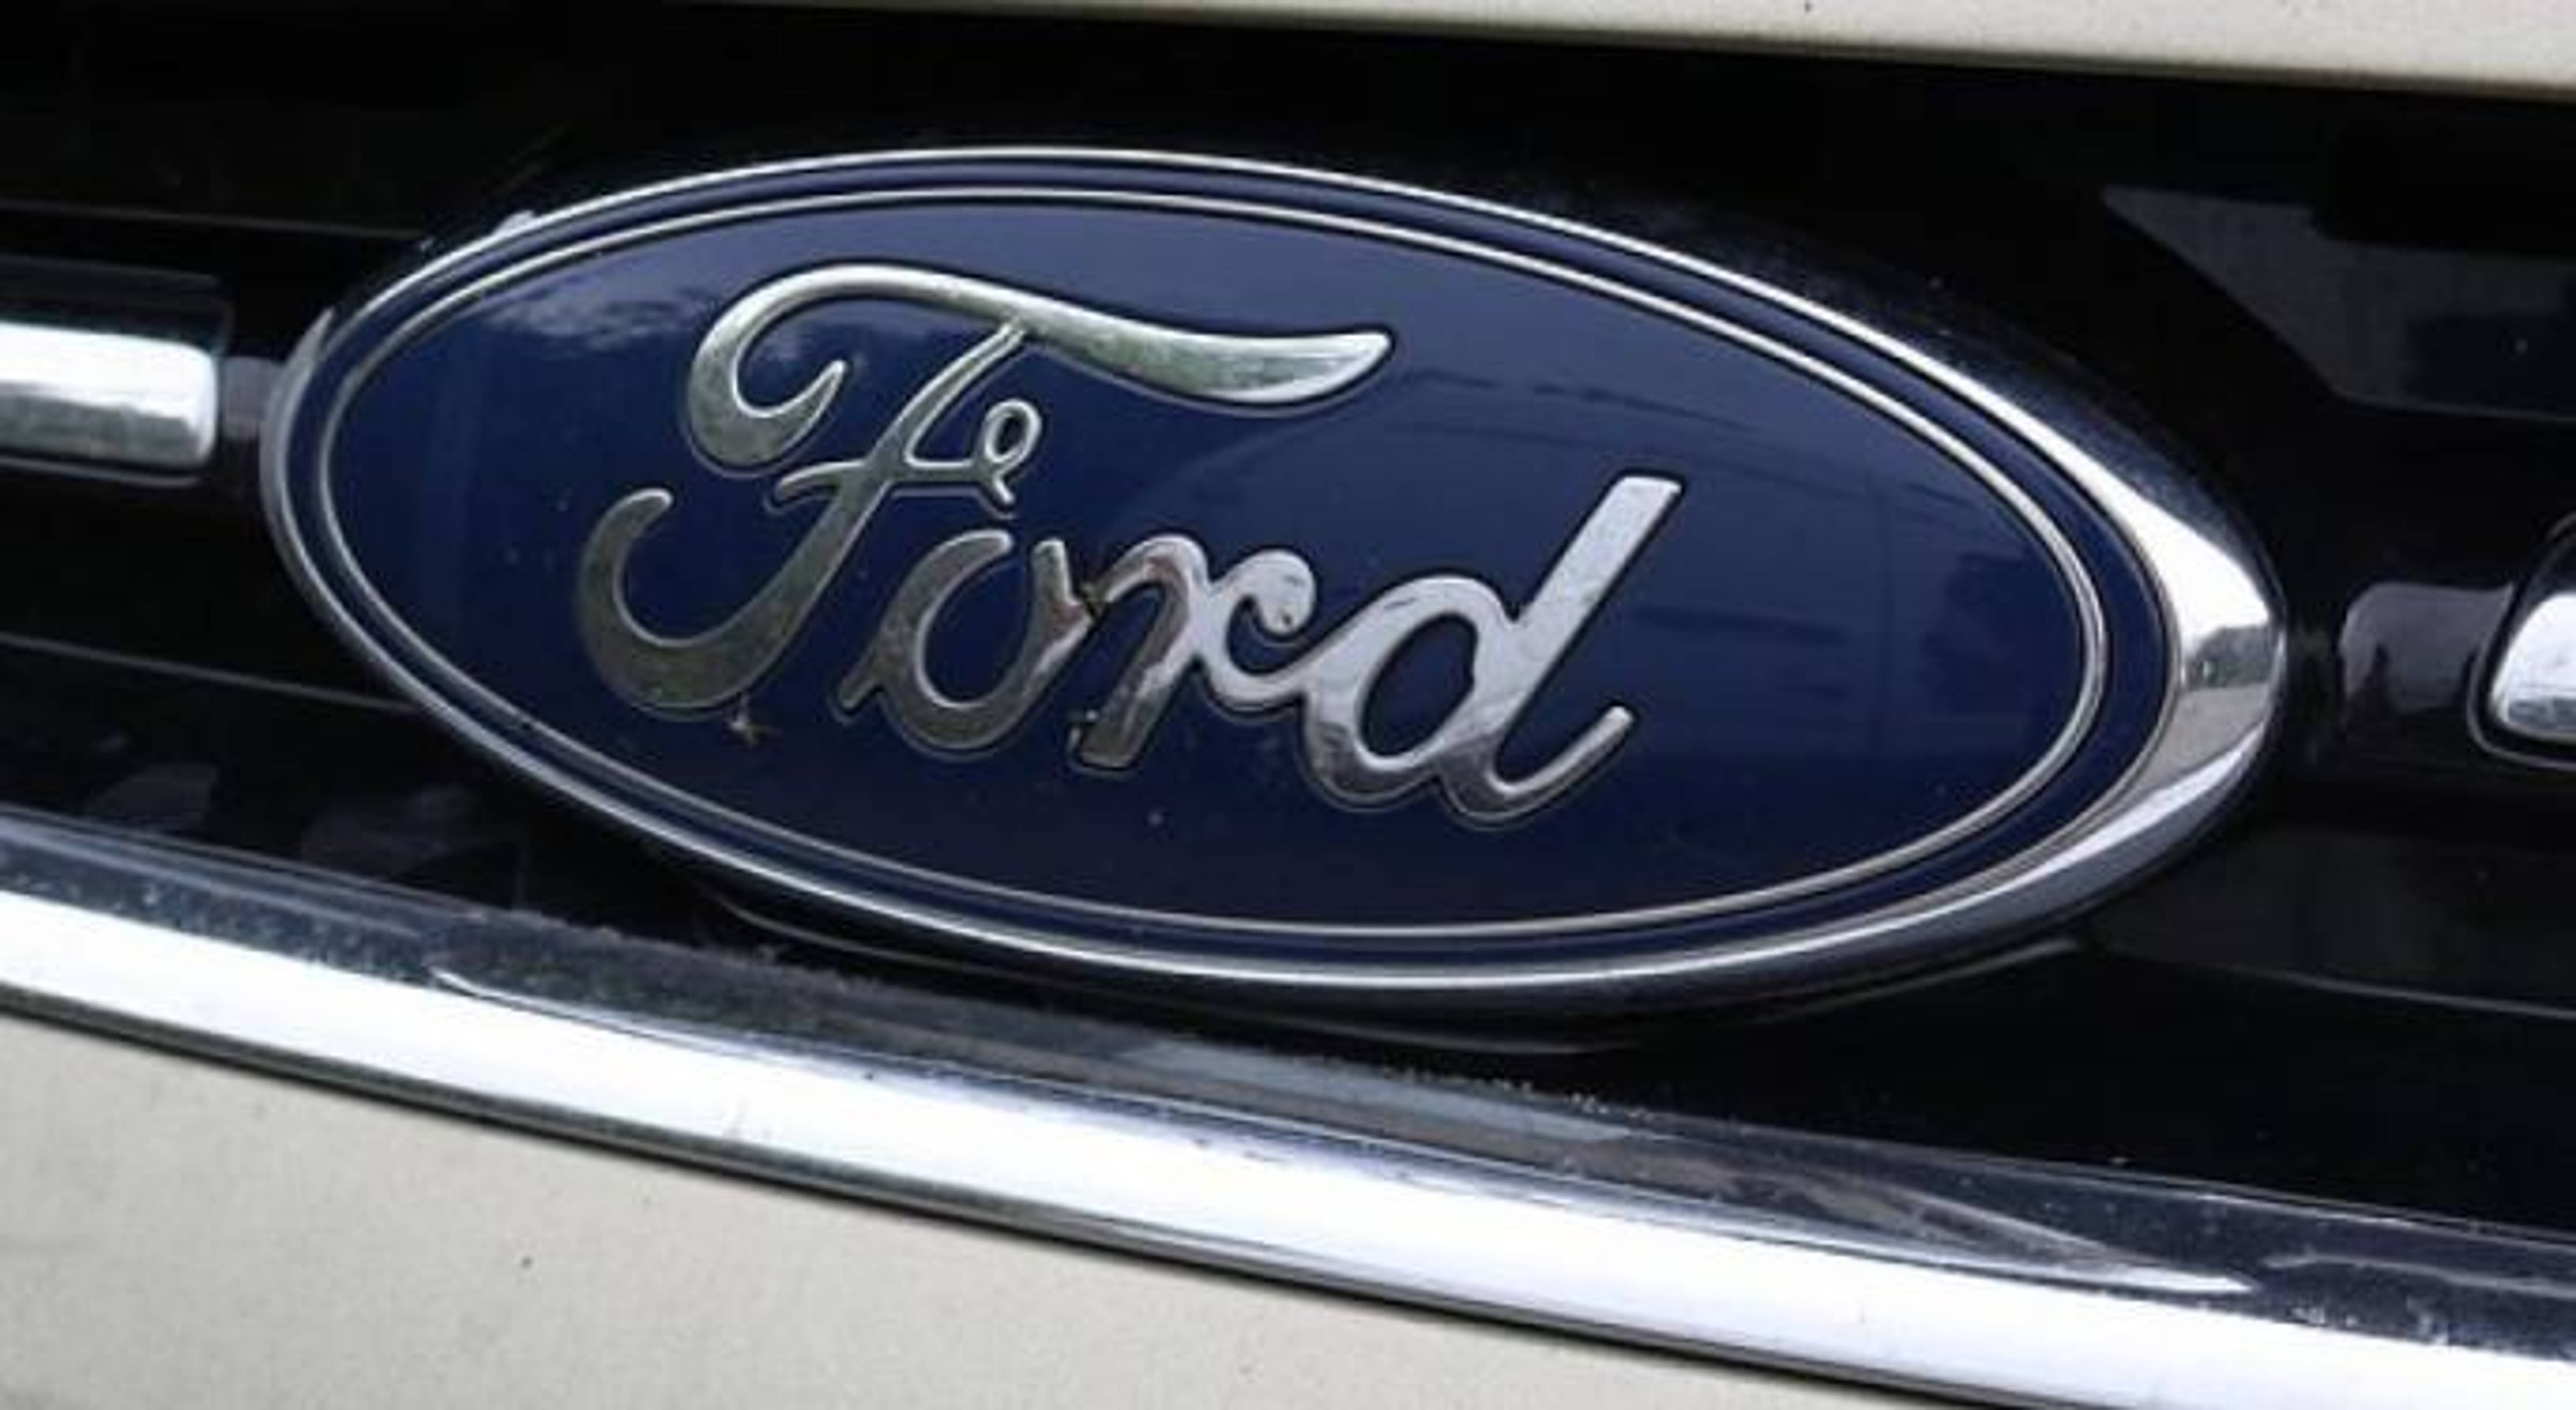 Why Is This Ford Analyst Downgrading The Stock?